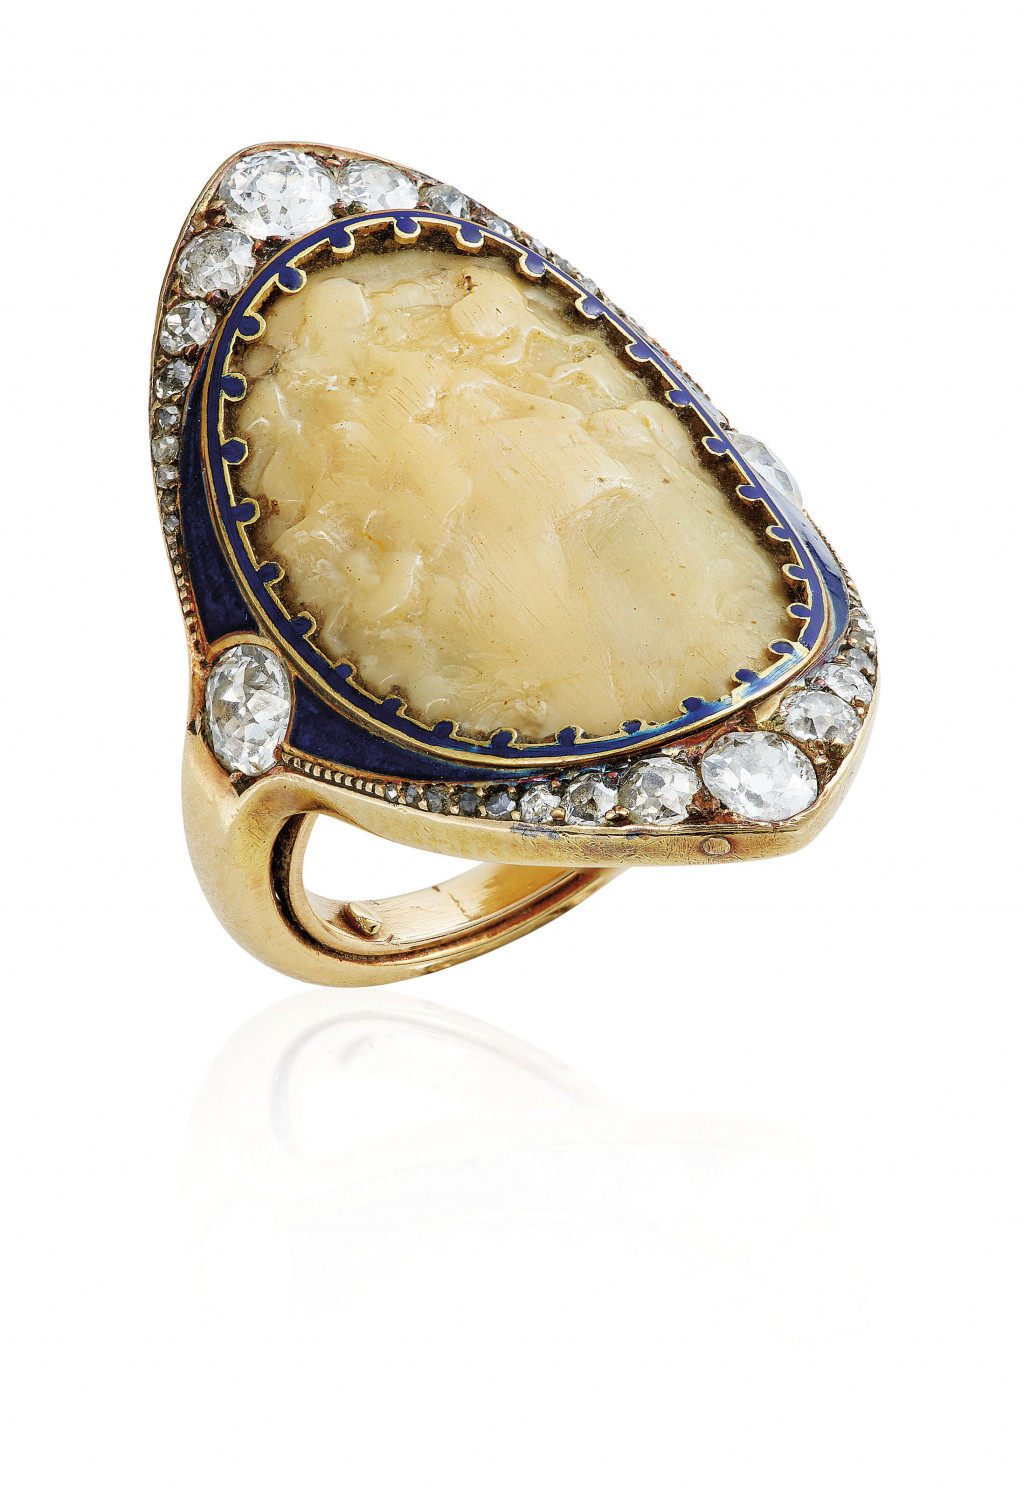 AN ART NOUVEAU GALALITH, DIAMOND AND ENAMEL RING, BY REN? LALIQUE.jpg